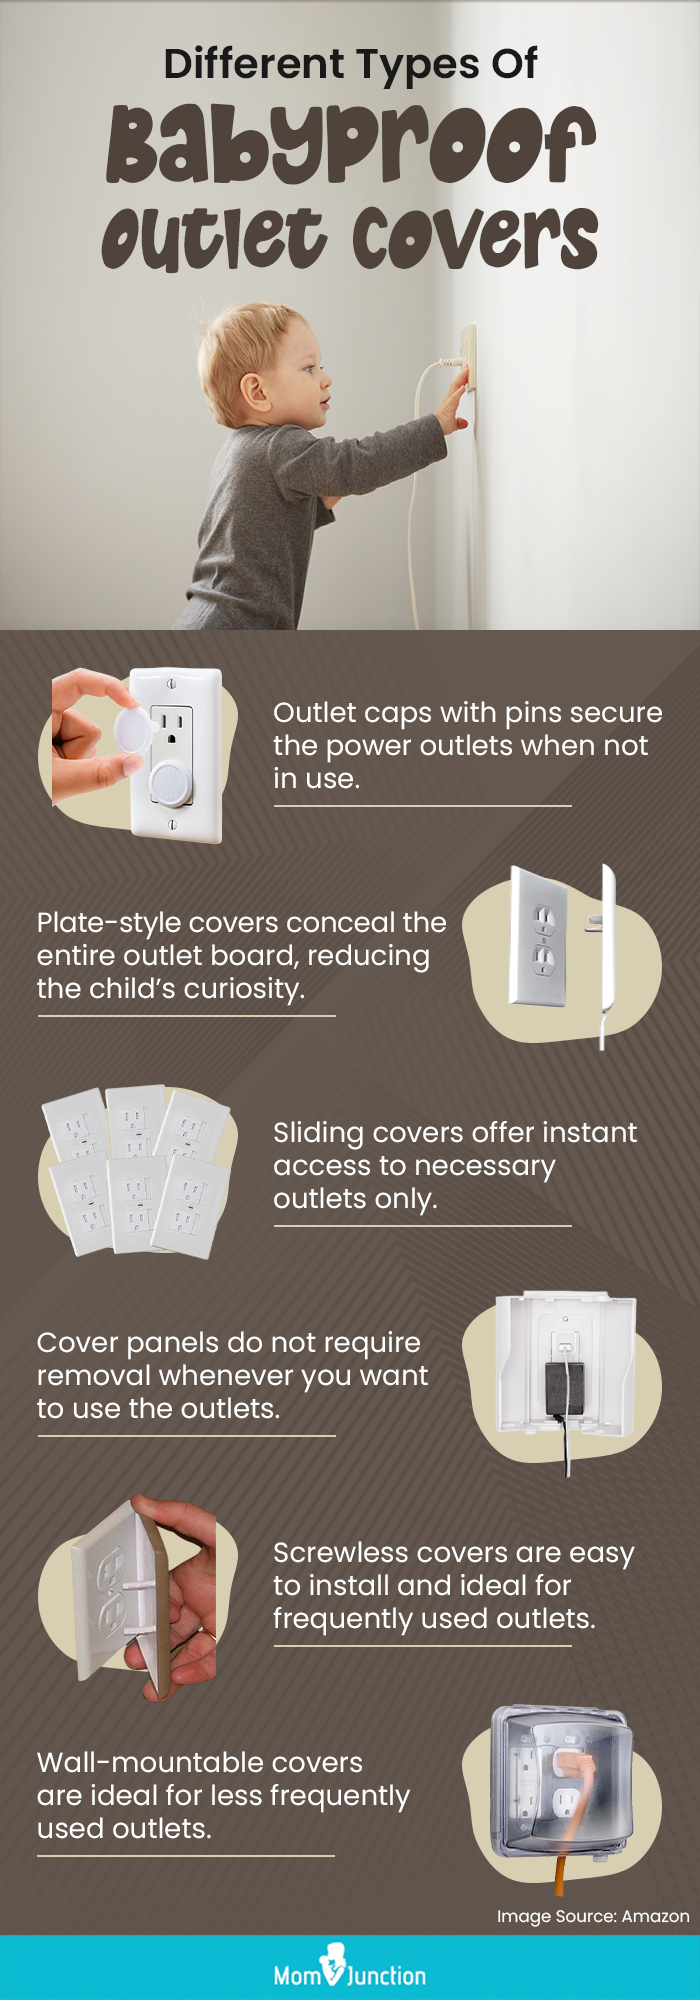 https://cdn2.momjunction.com/wp-content/uploads/2019/04/Different-Types-Of-Babyproof-Outlet-Covers.png